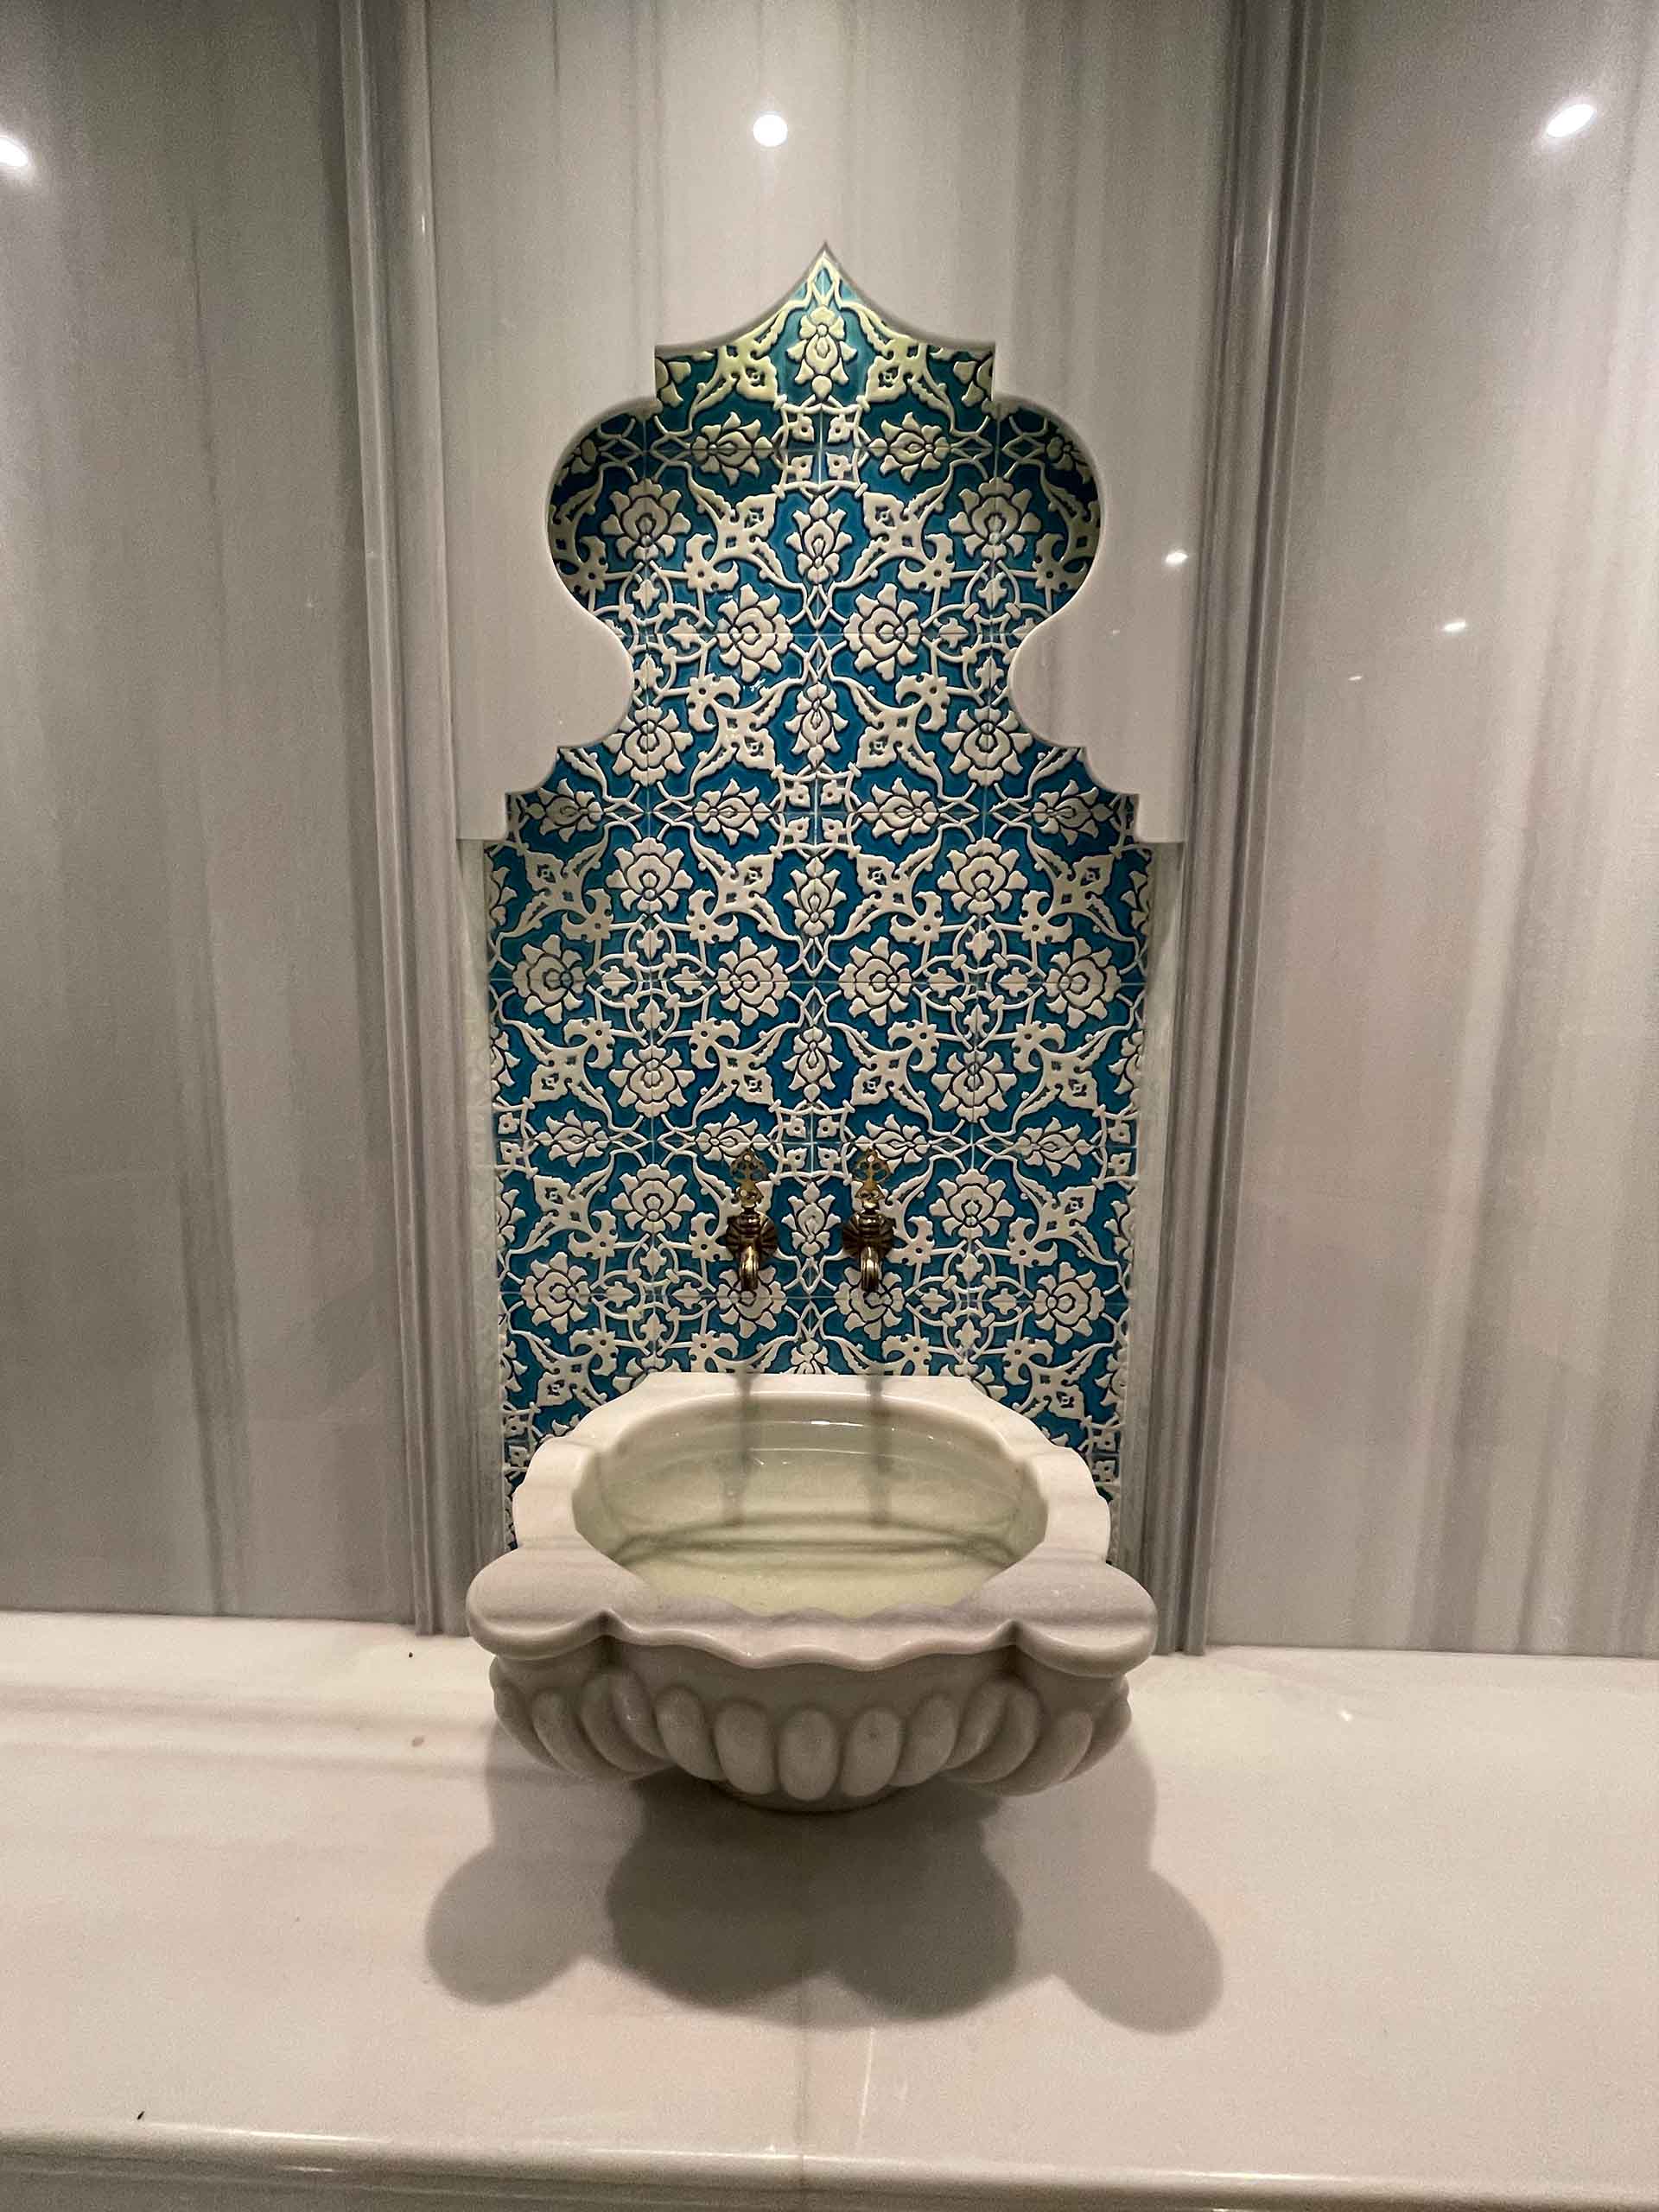 Münster's Hammam Elegance - Elevate your well-being. Buy our carefully crafted hammam, where innovative design meets affordability for a transformative experience.